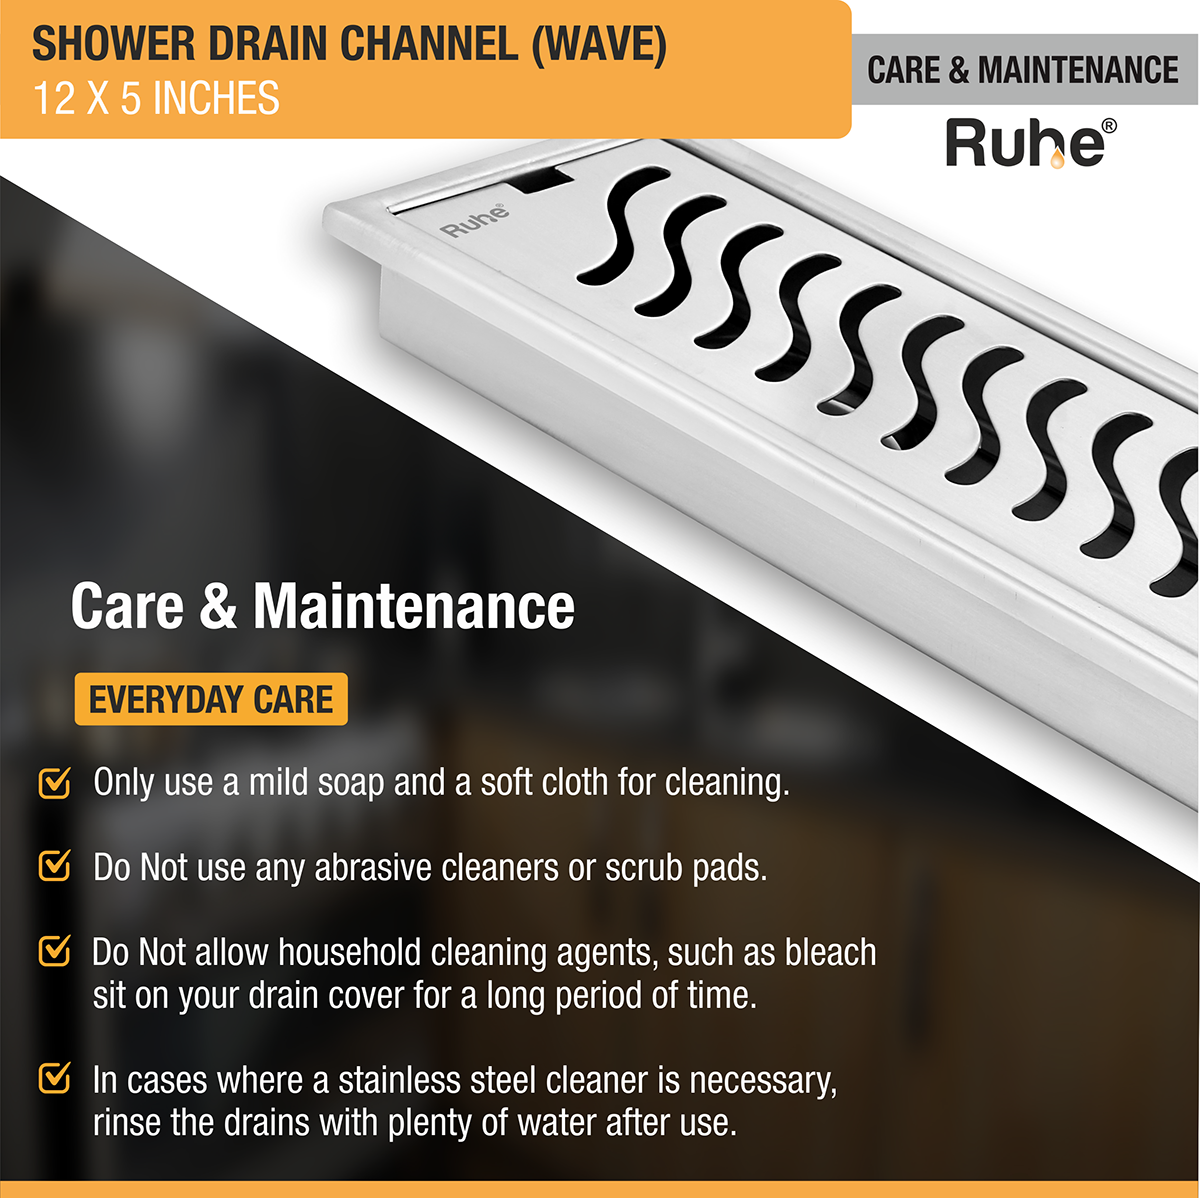 Wave Shower Drain Channel (12 X 5 Inches) with Cockroach Trap (304 Grade) care and maintenance